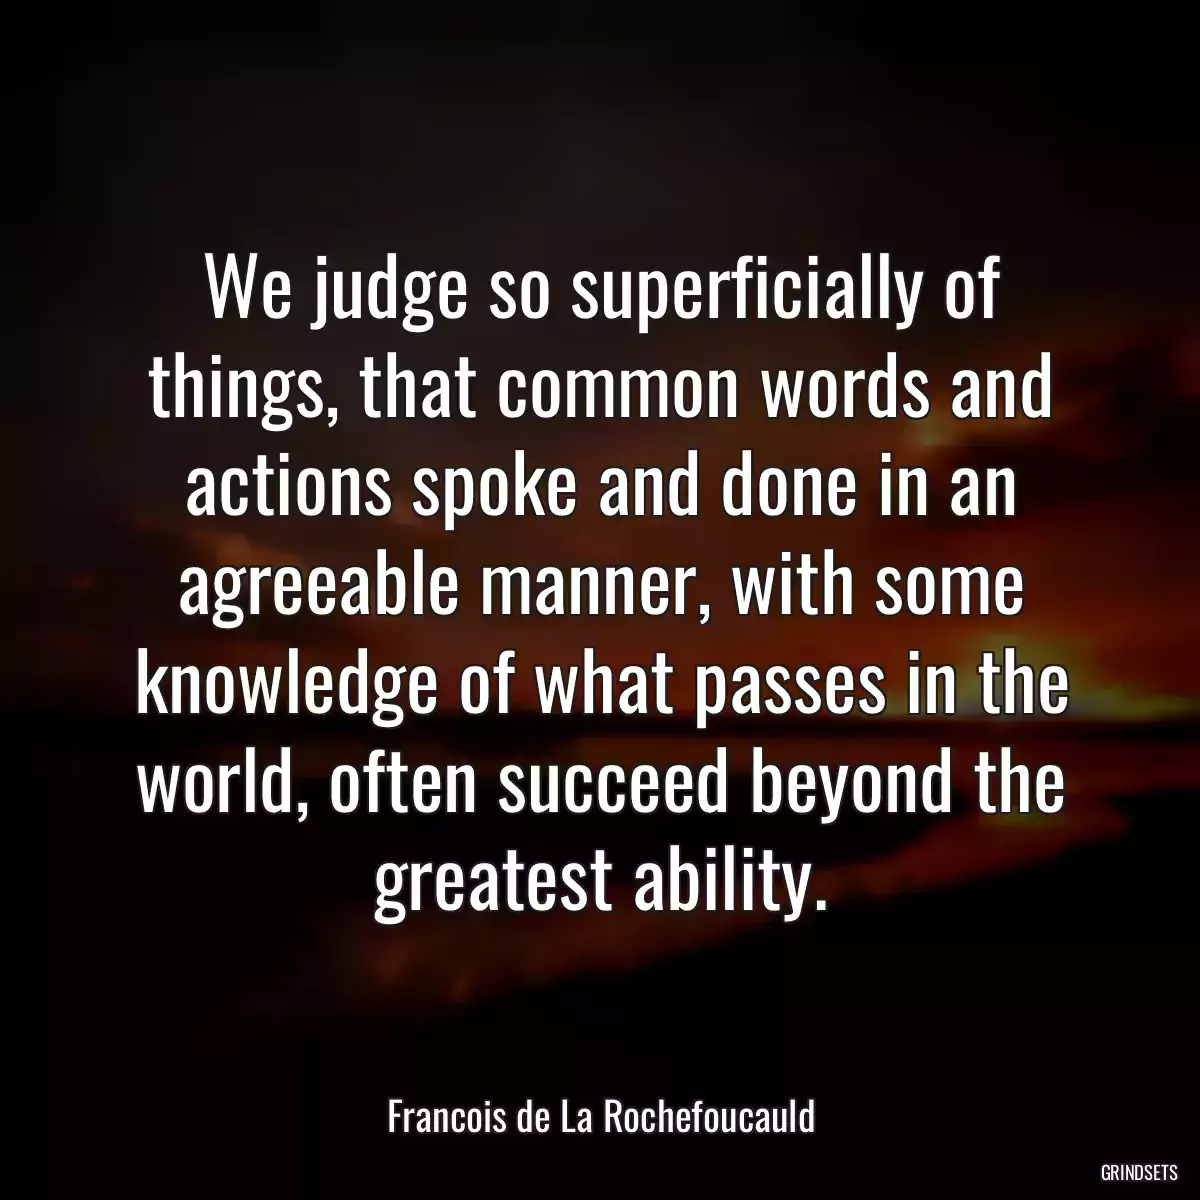 We judge so superficially of things, that common words and actions spoke and done in an agreeable manner, with some knowledge of what passes in the world, often succeed beyond the greatest ability.